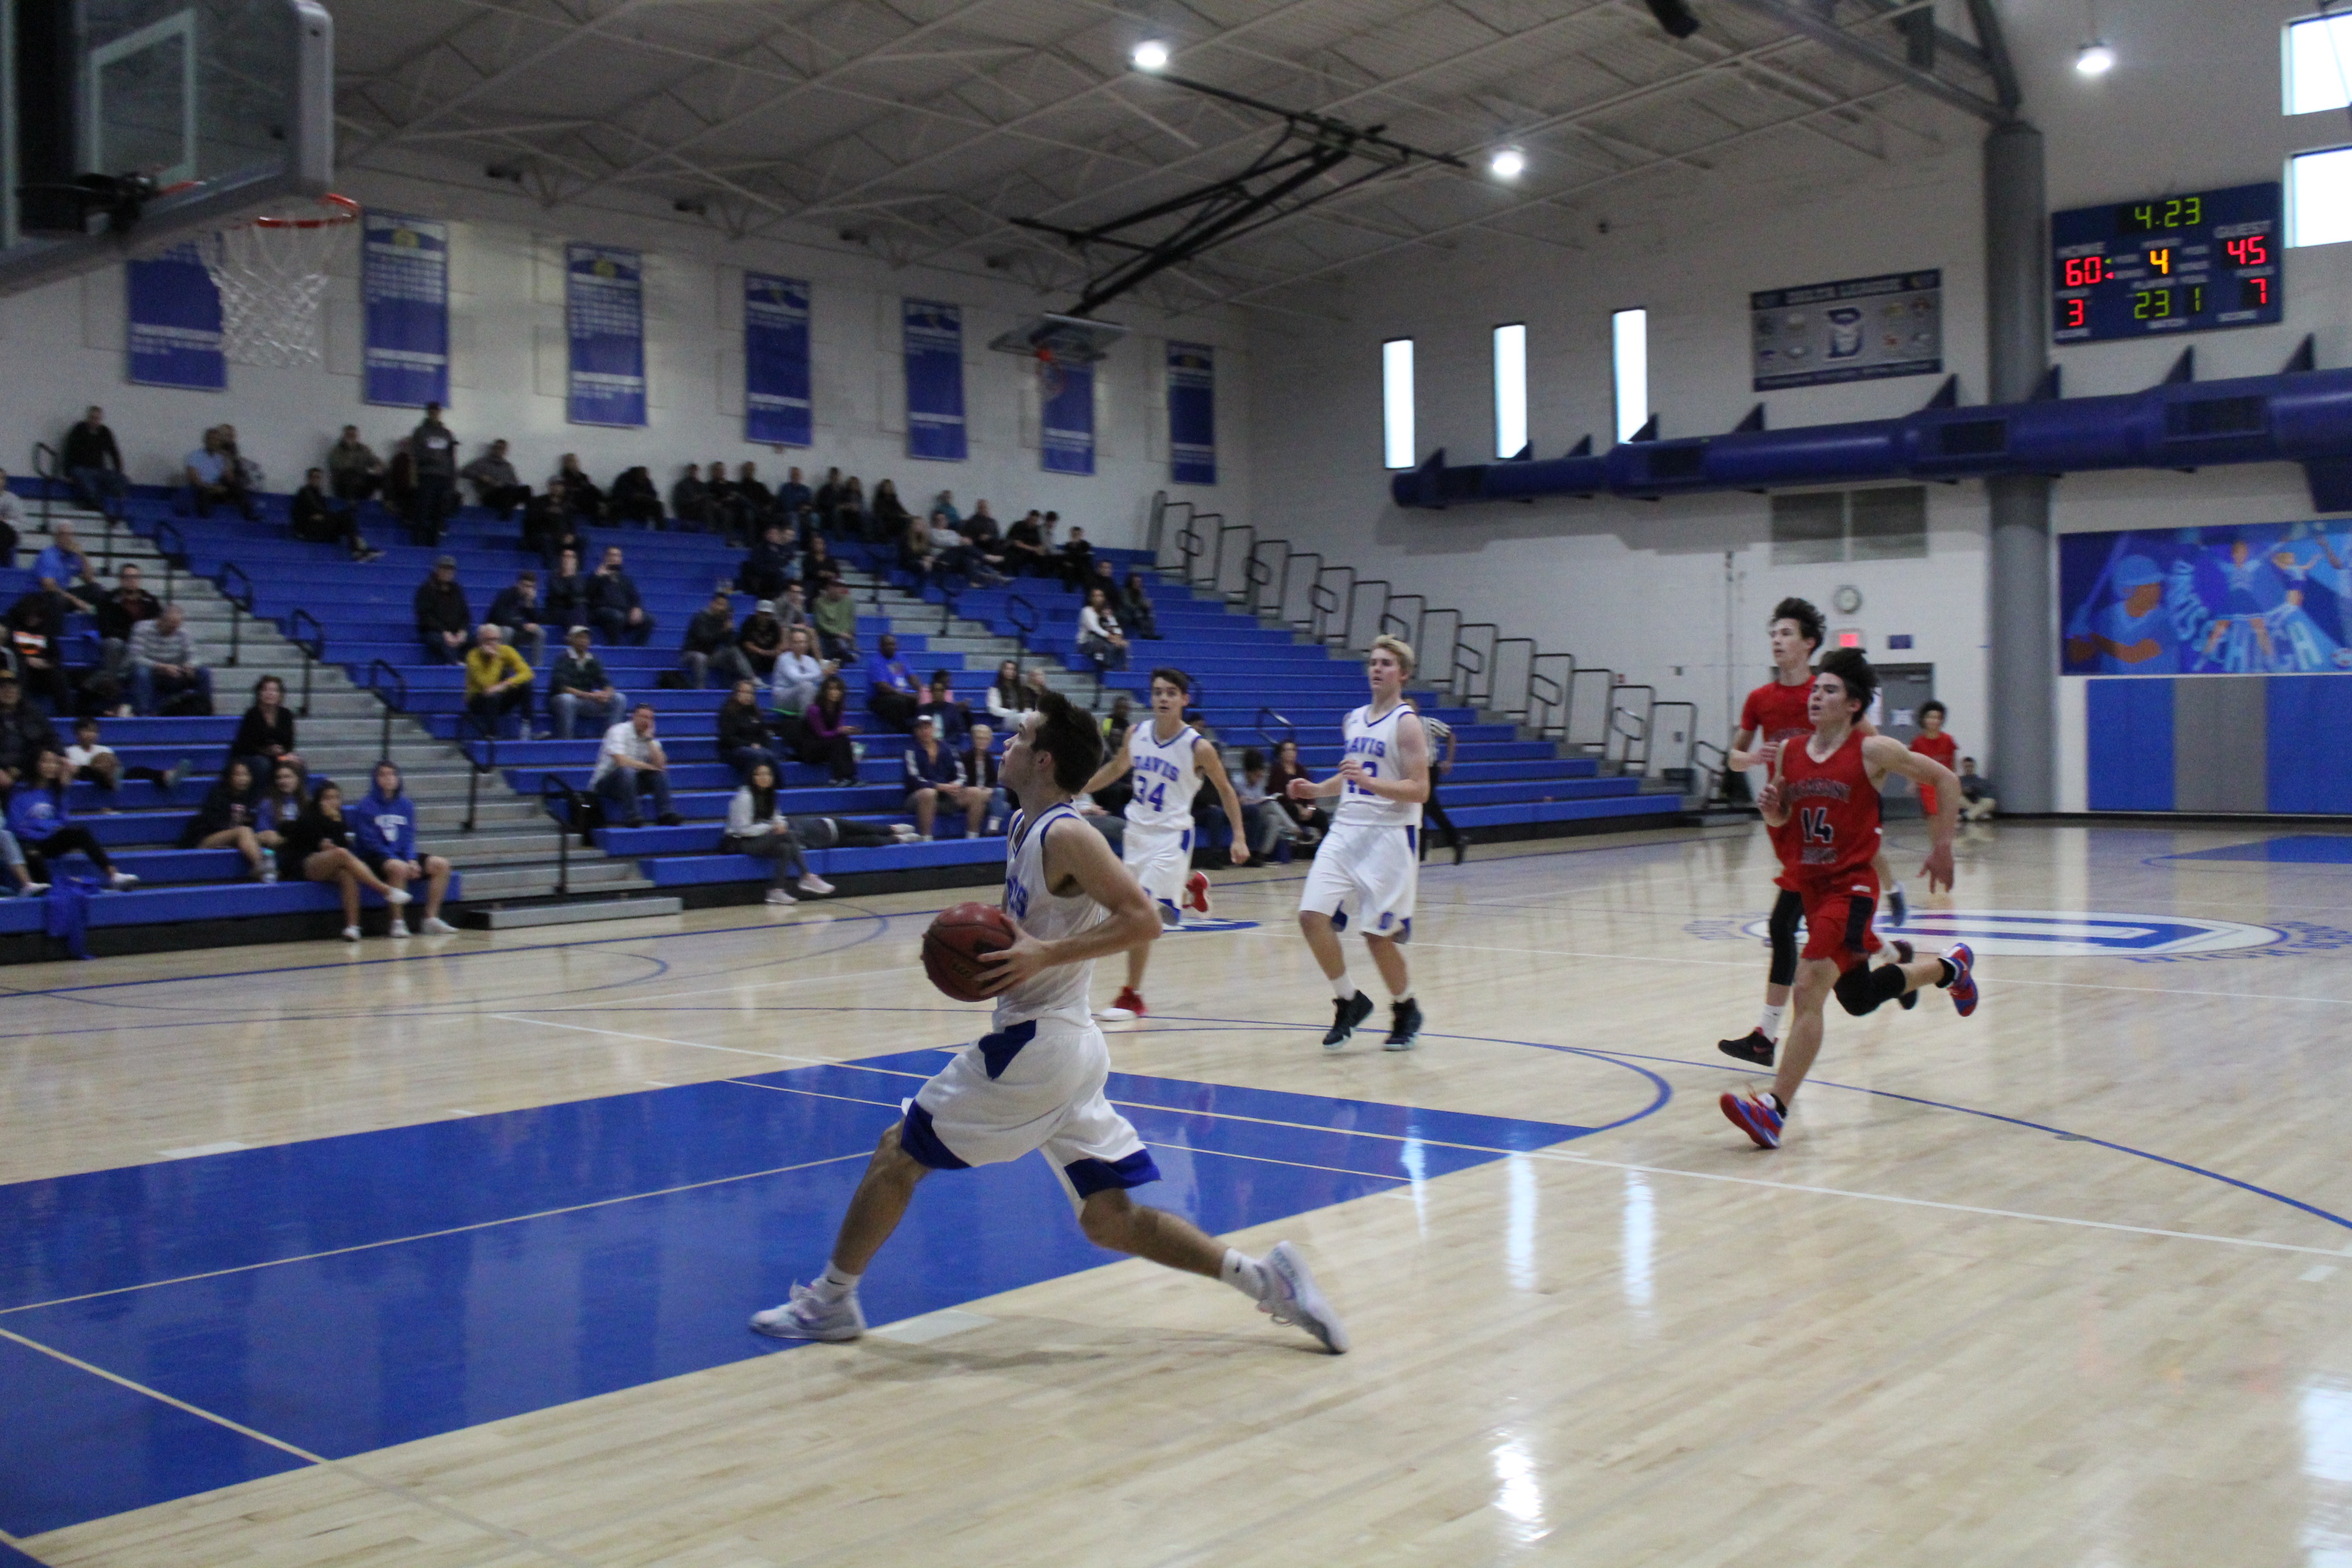 Junior Joey Voss strides toward the basket for two points.